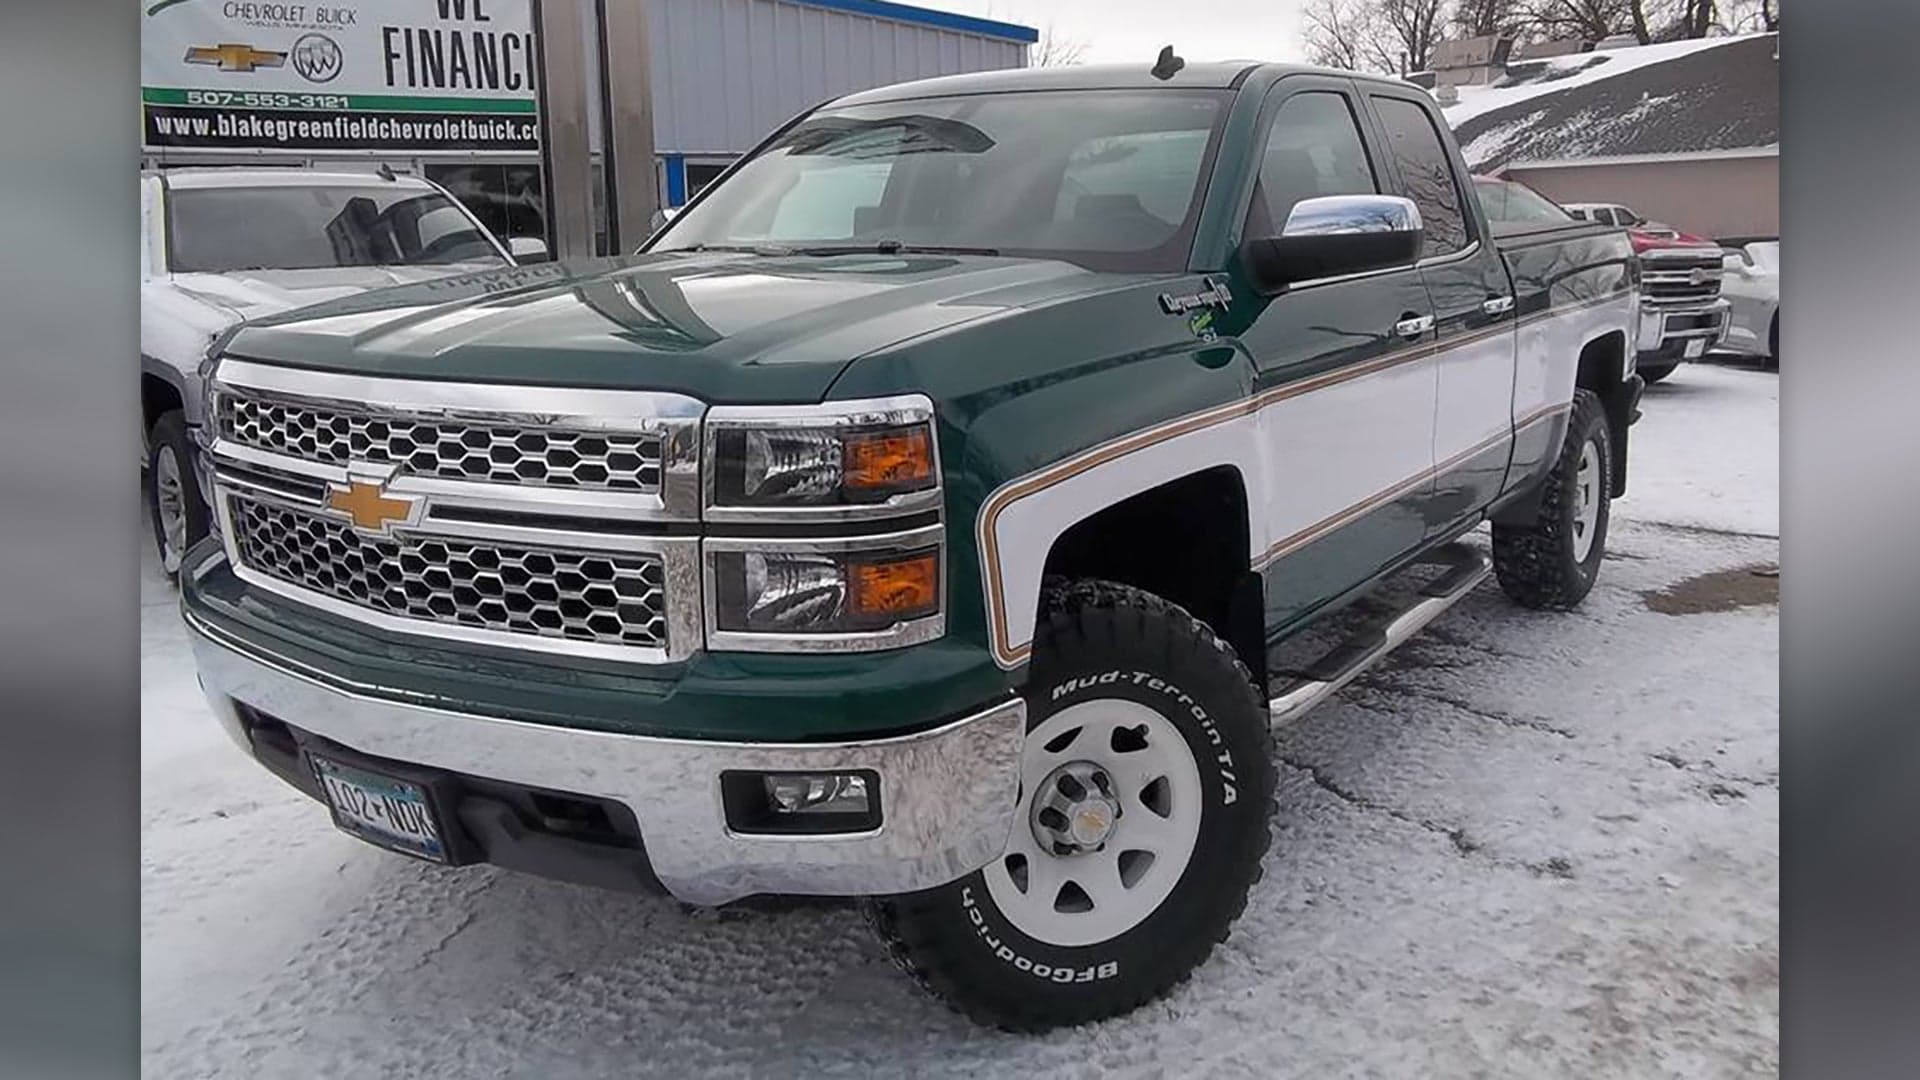 Chevy Dealer Keeping the Classic Pickup Look Alive With This Cheyenne Super 10 Build